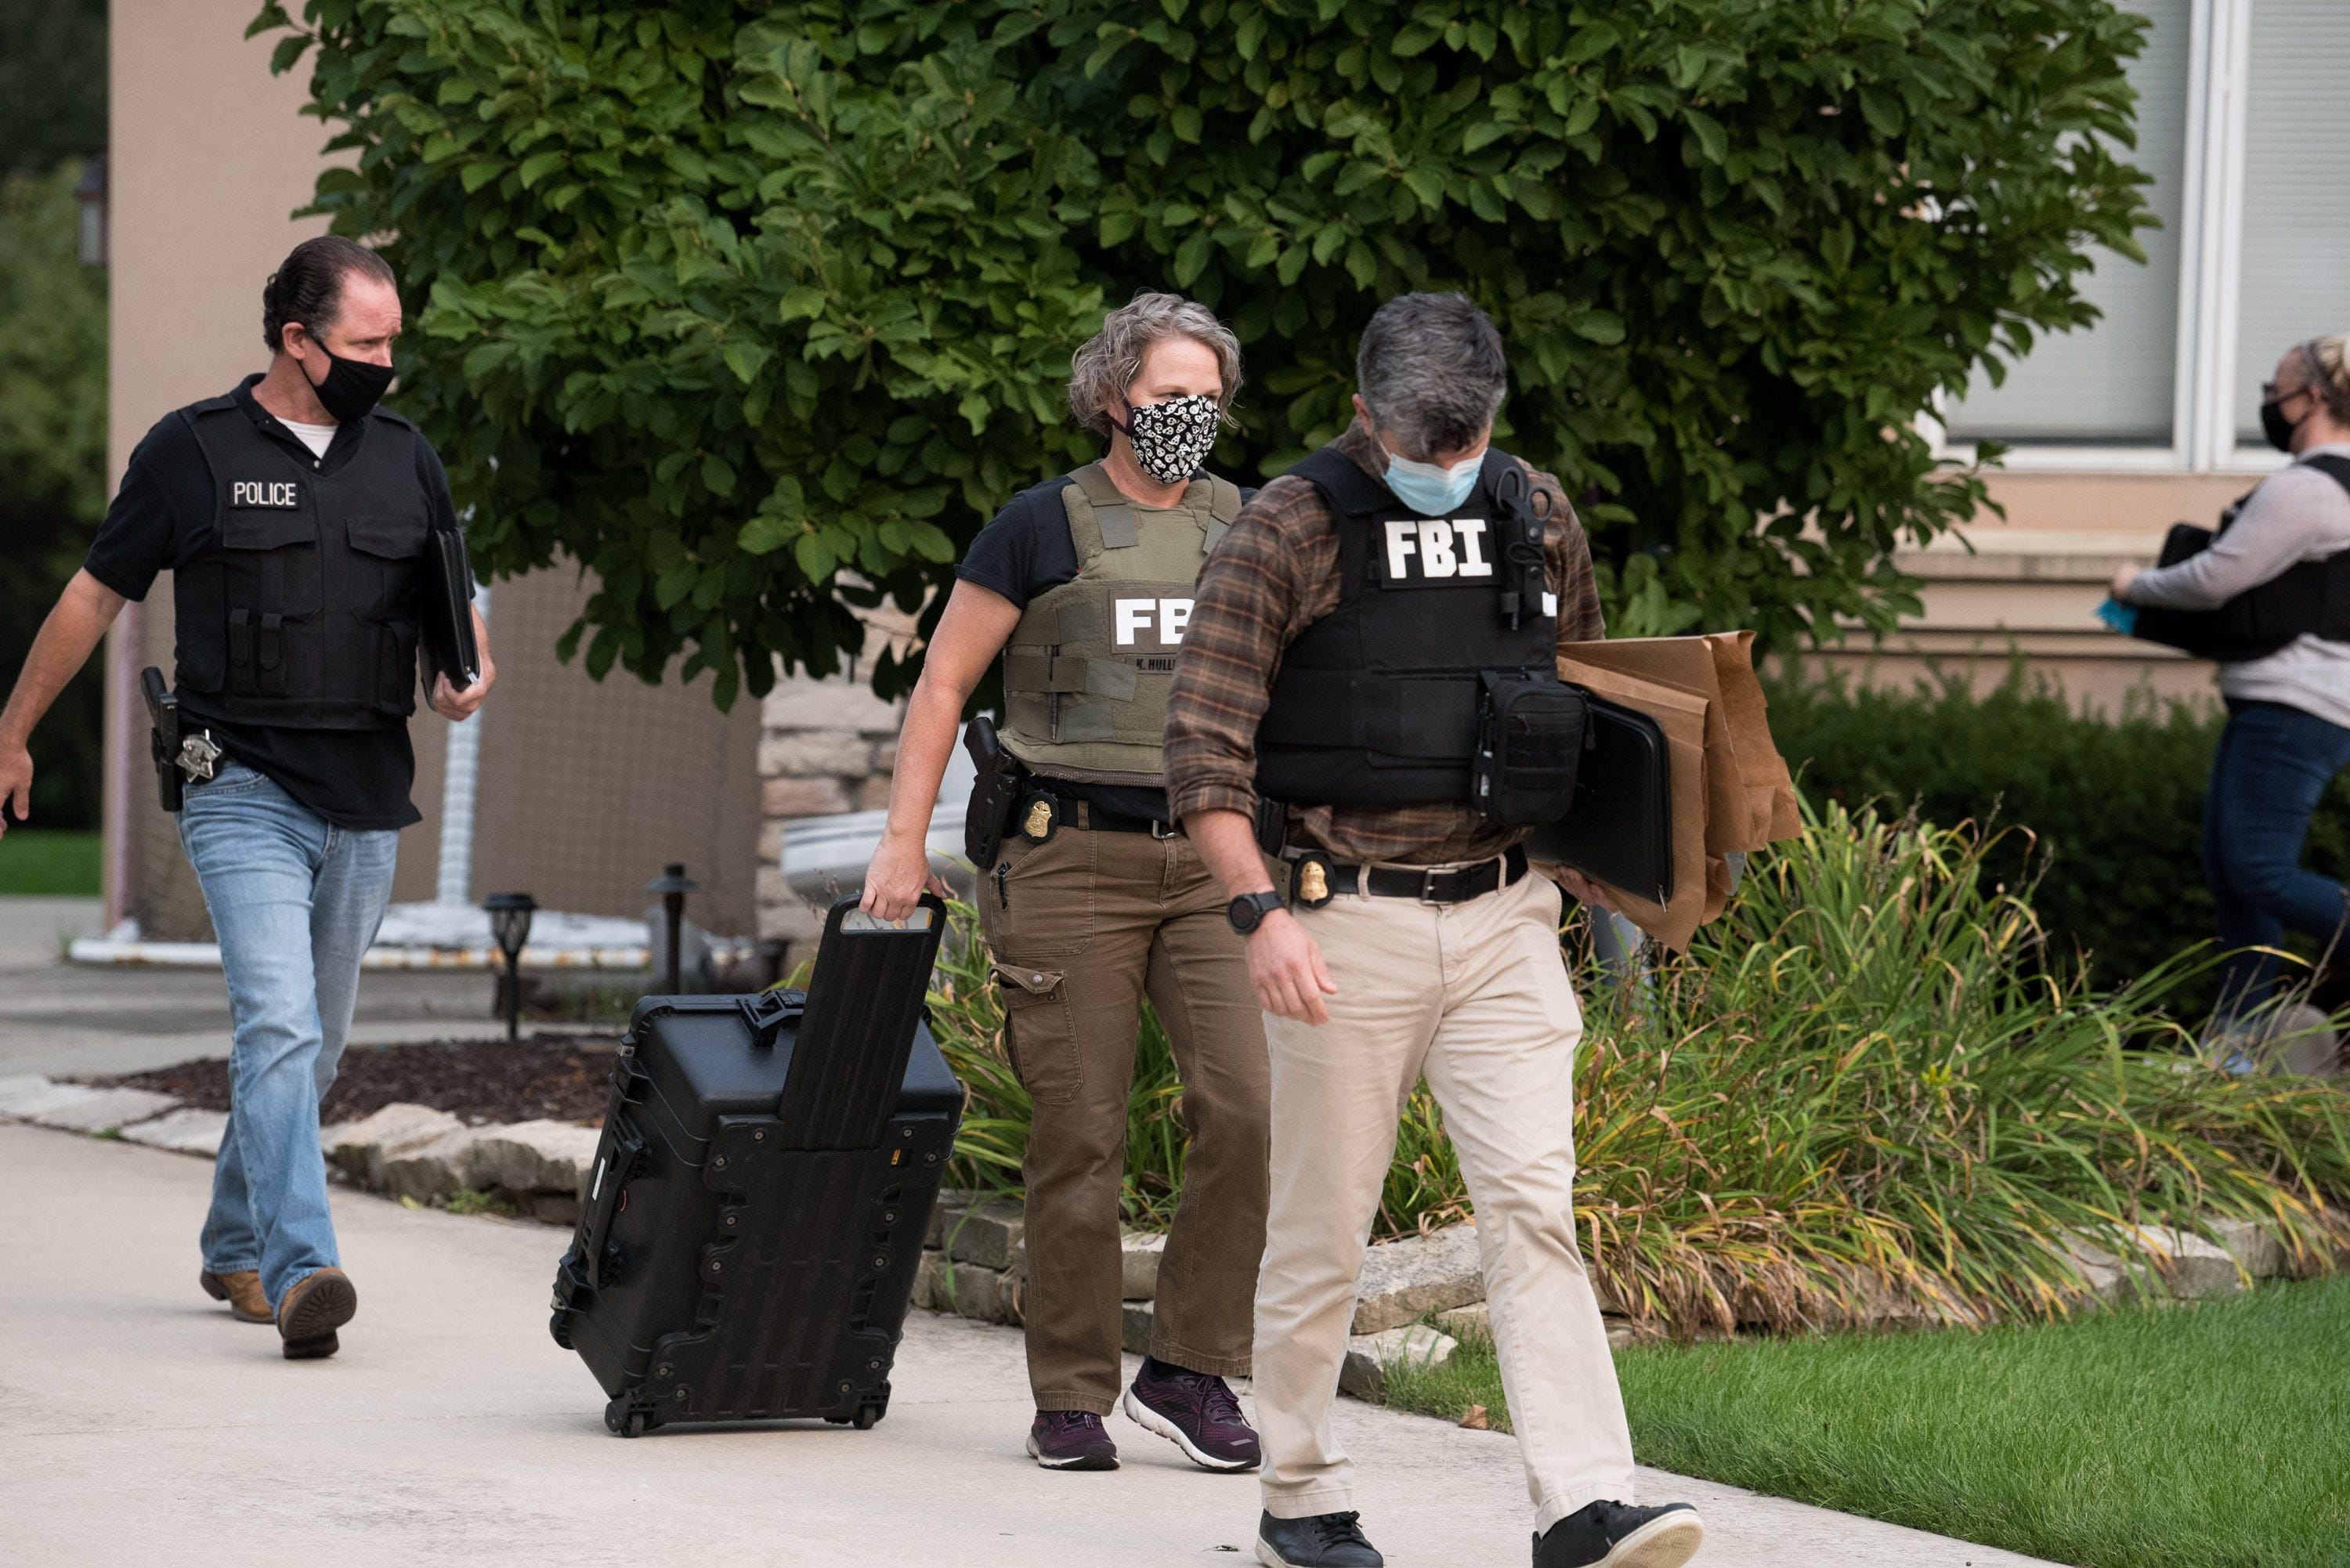 FBI executes a search warrant at a home in Naperville, Illinois. on Sept. 14, 2020. The search is part of an investigation into allegations that Netflix "Cheer" star Jerry Harris solicited nude photos and sex from minors.